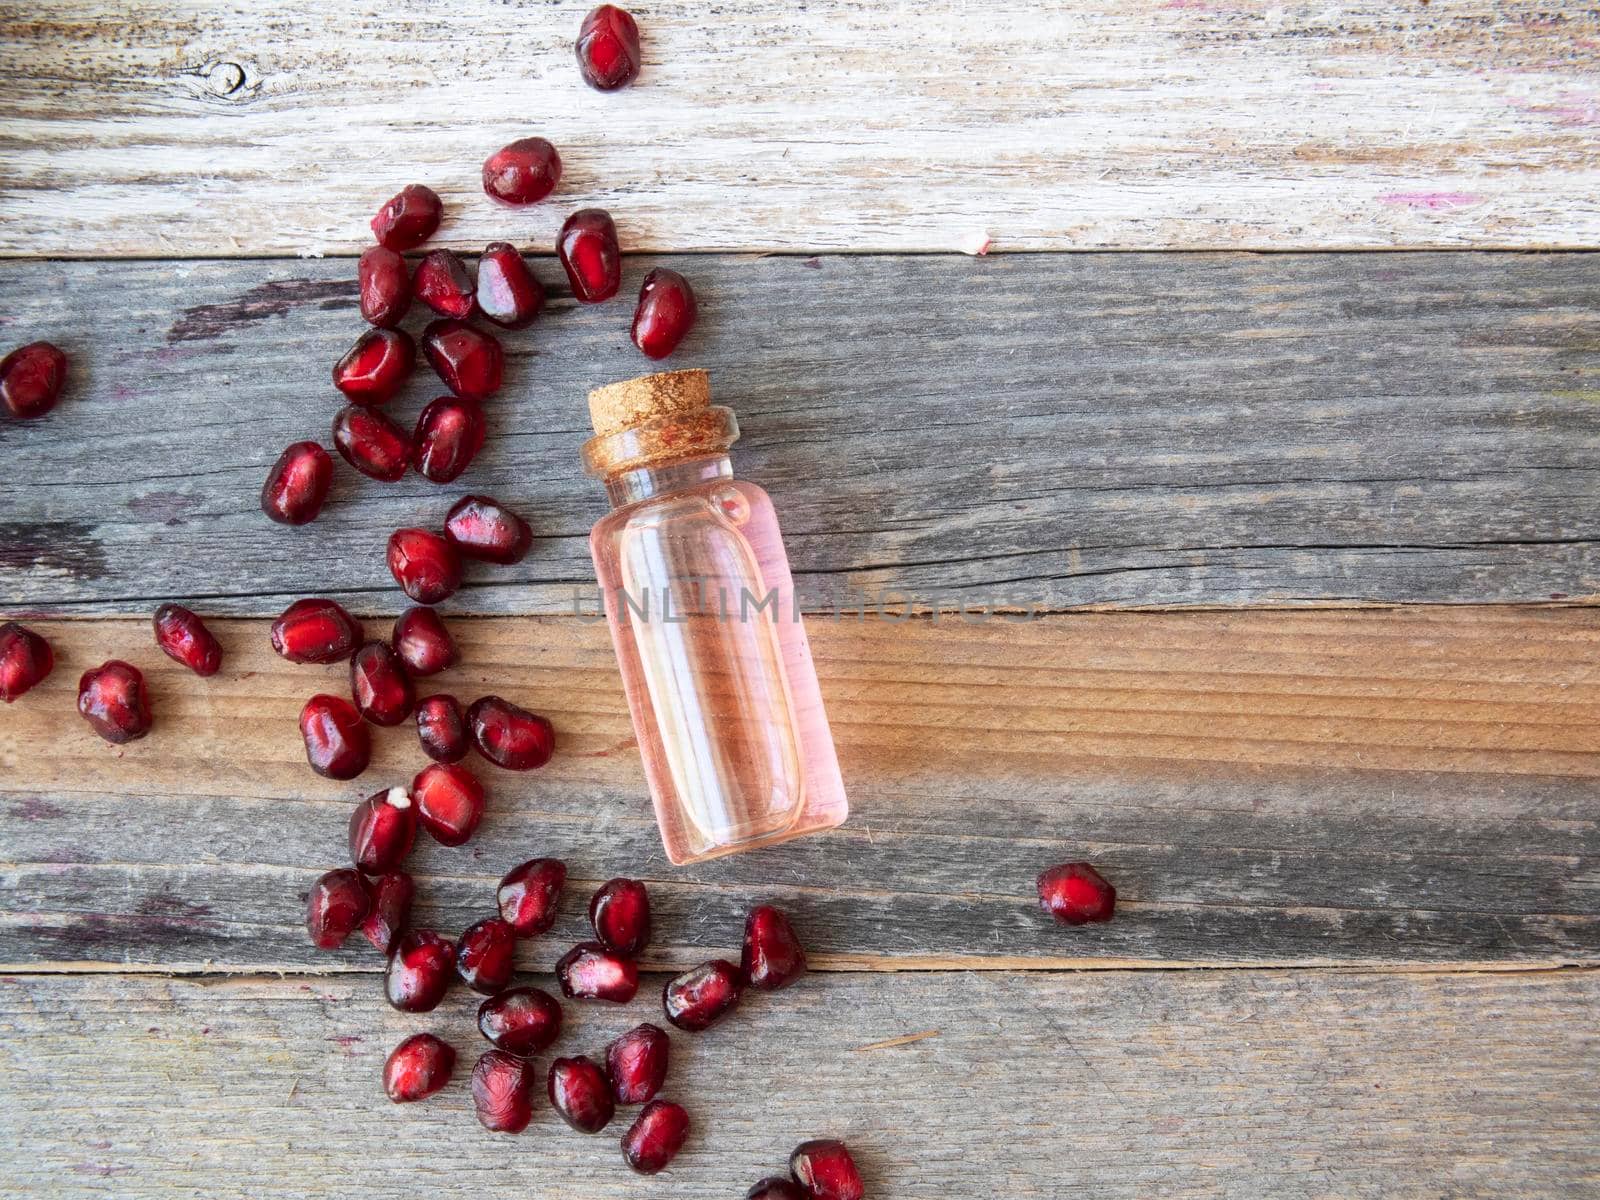 Pomegranate Extract with Seeds by charlotteLake